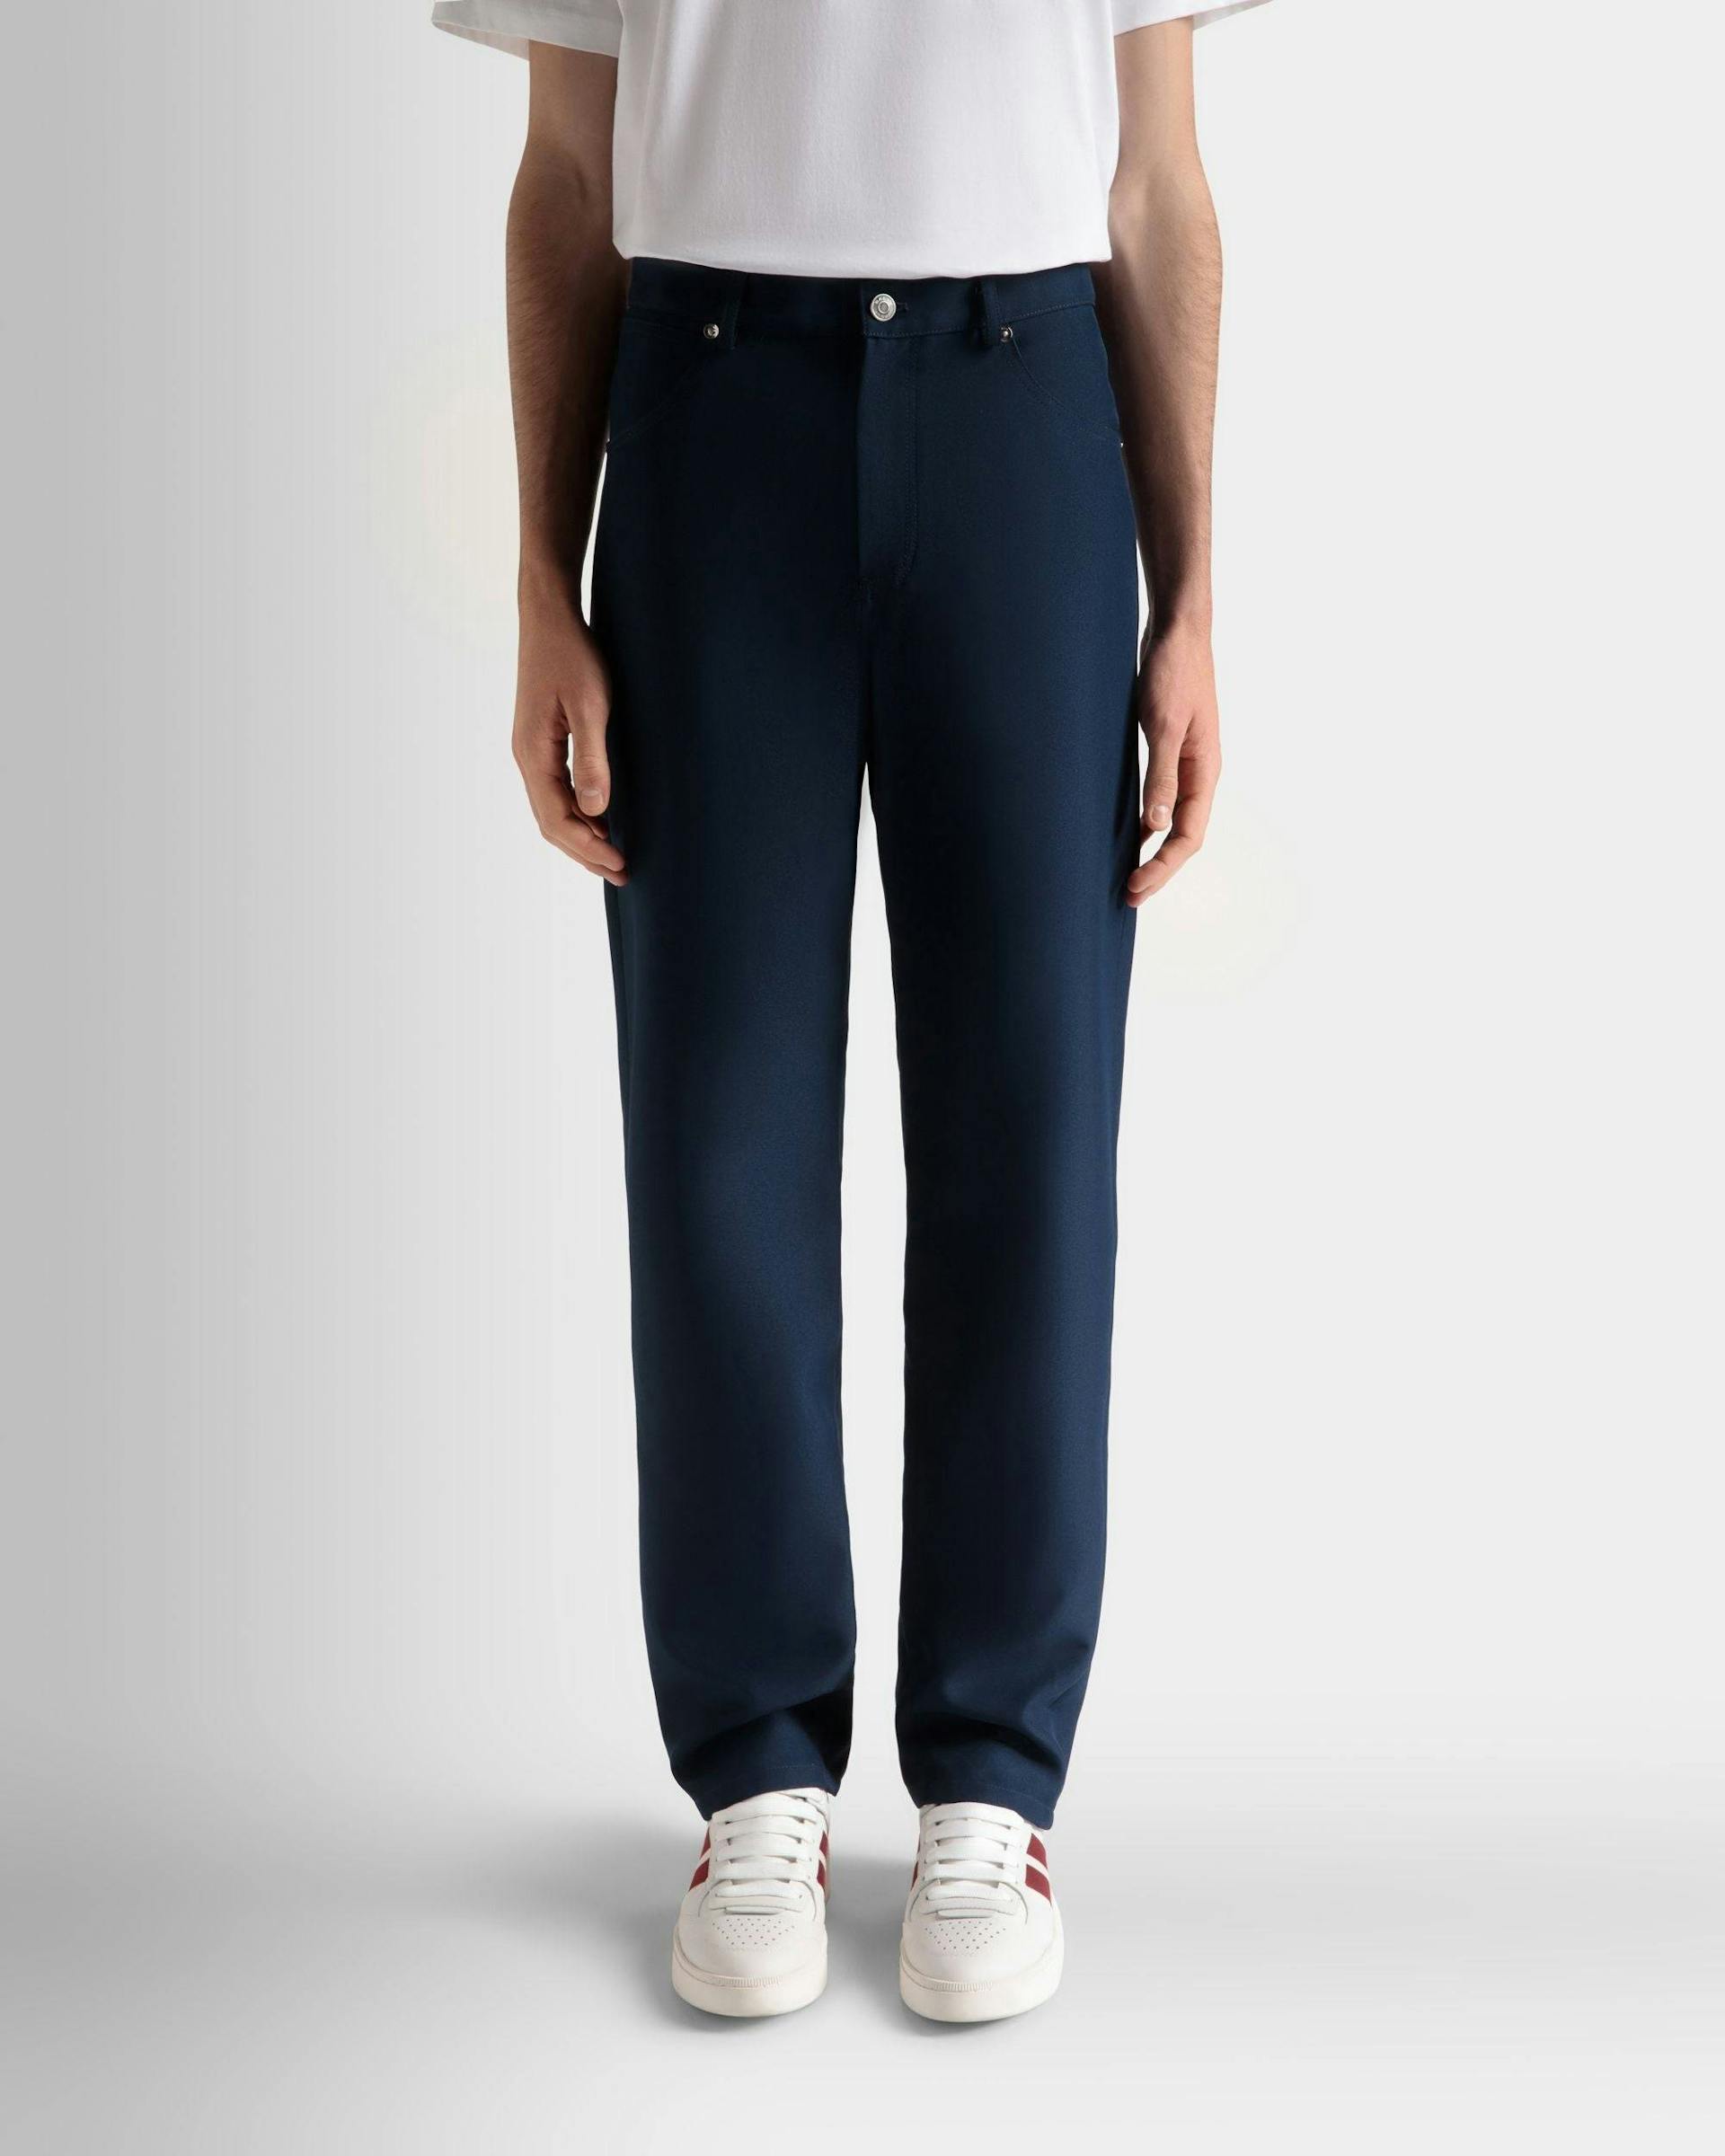 Men's Pants In Dark Blue Synthetic Fabric | Bally | On Model Close Up